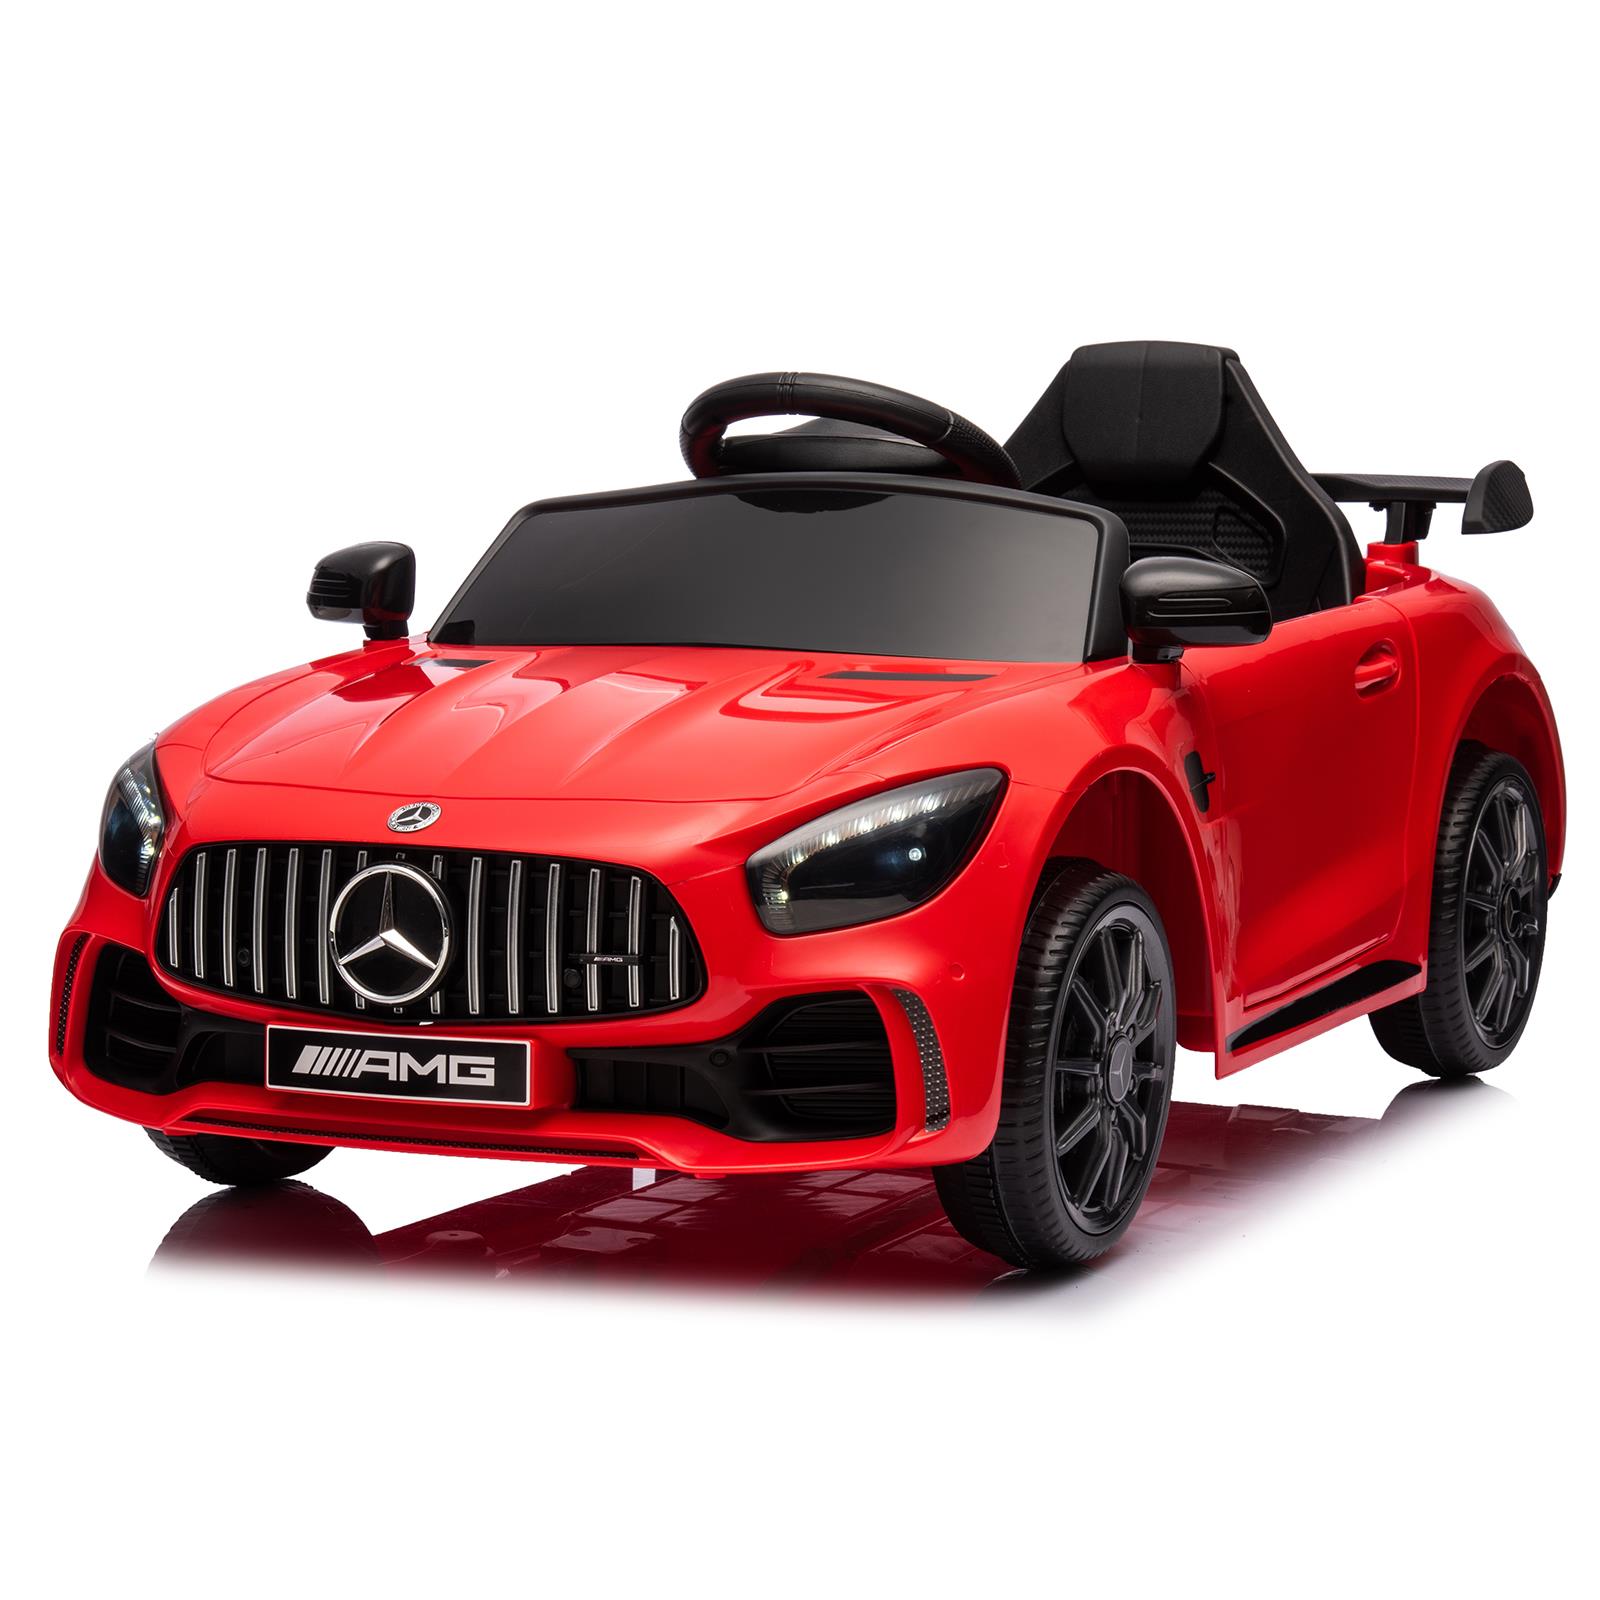 UBesGoo 12V Licensed Mercedes-Benz Electric Ride on Car Toy for Toddler Kid w/ Remote Control, LED Lights, Red - image 1 of 11